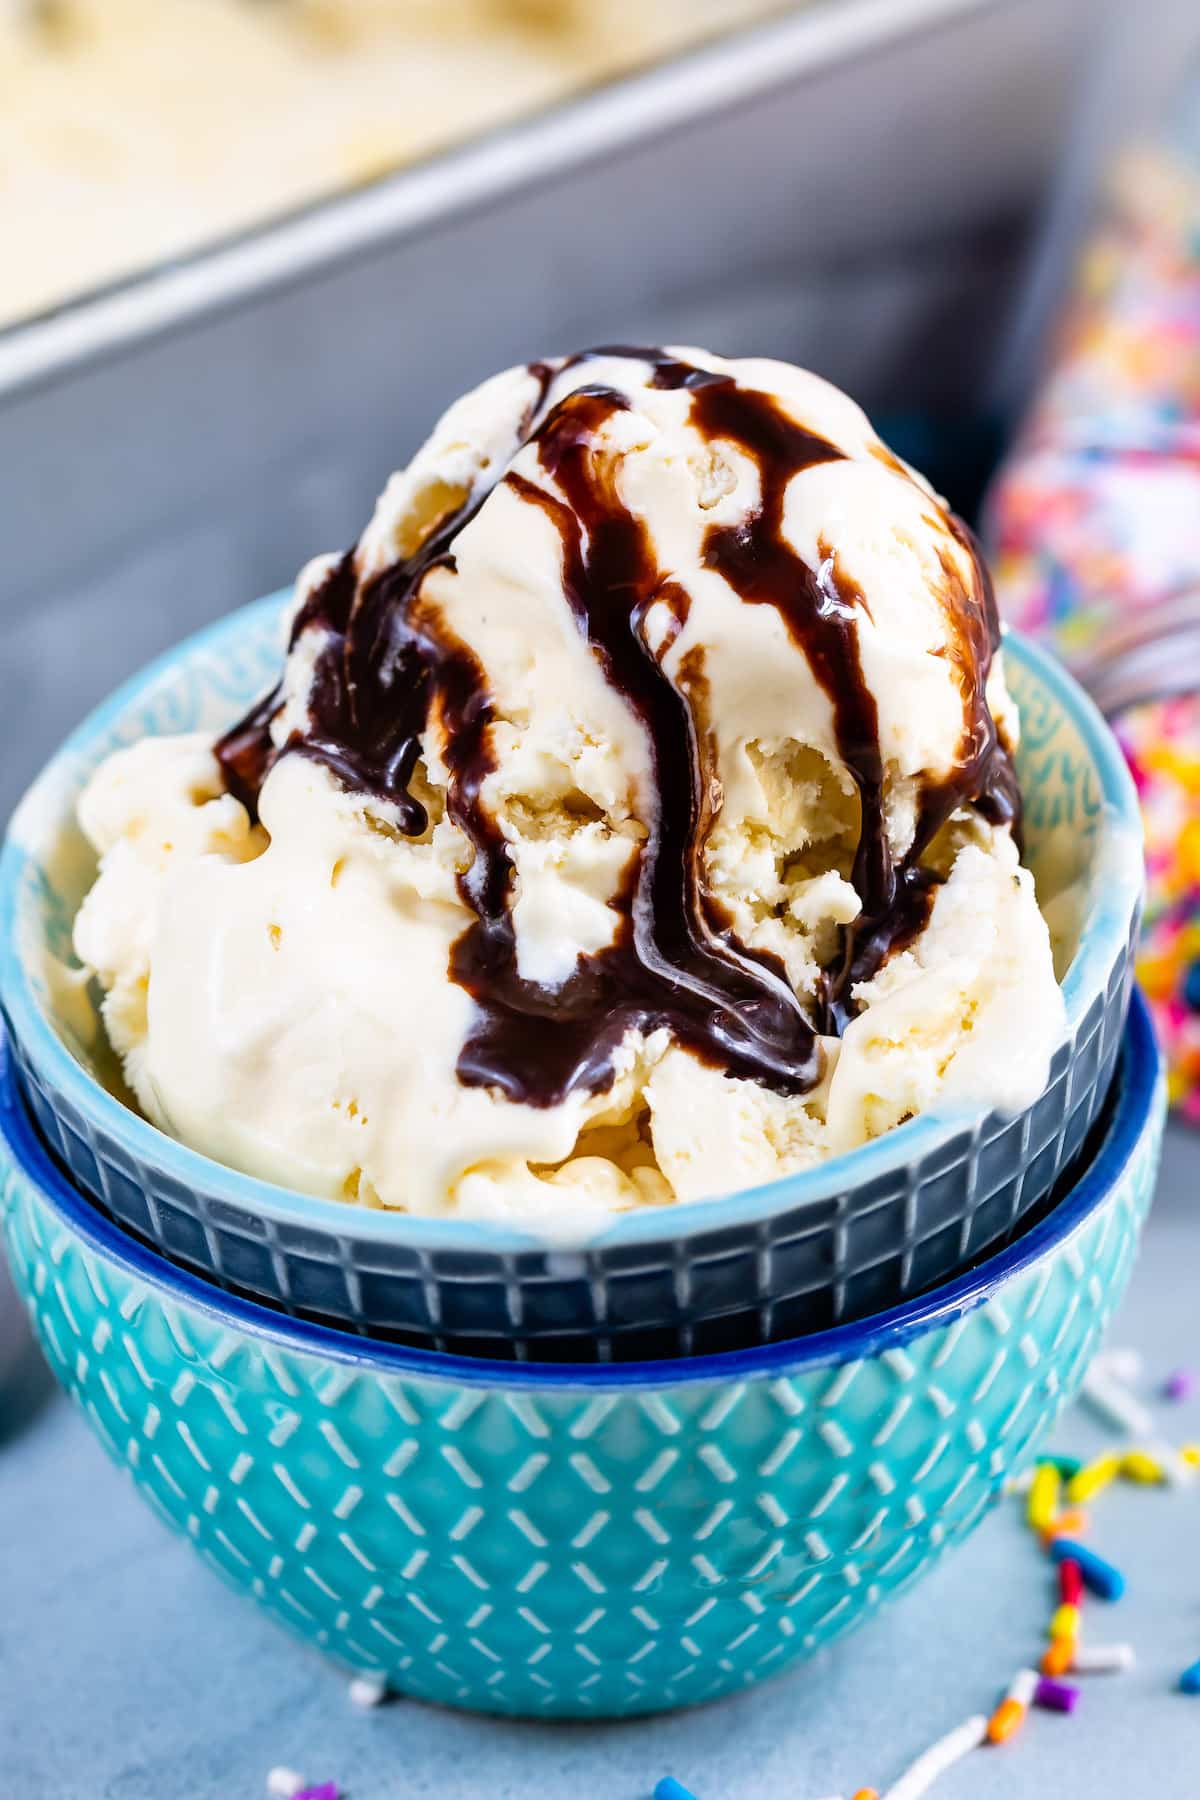 ice cream in blue bowls with chocolate sauce drizzled over the ice cream.